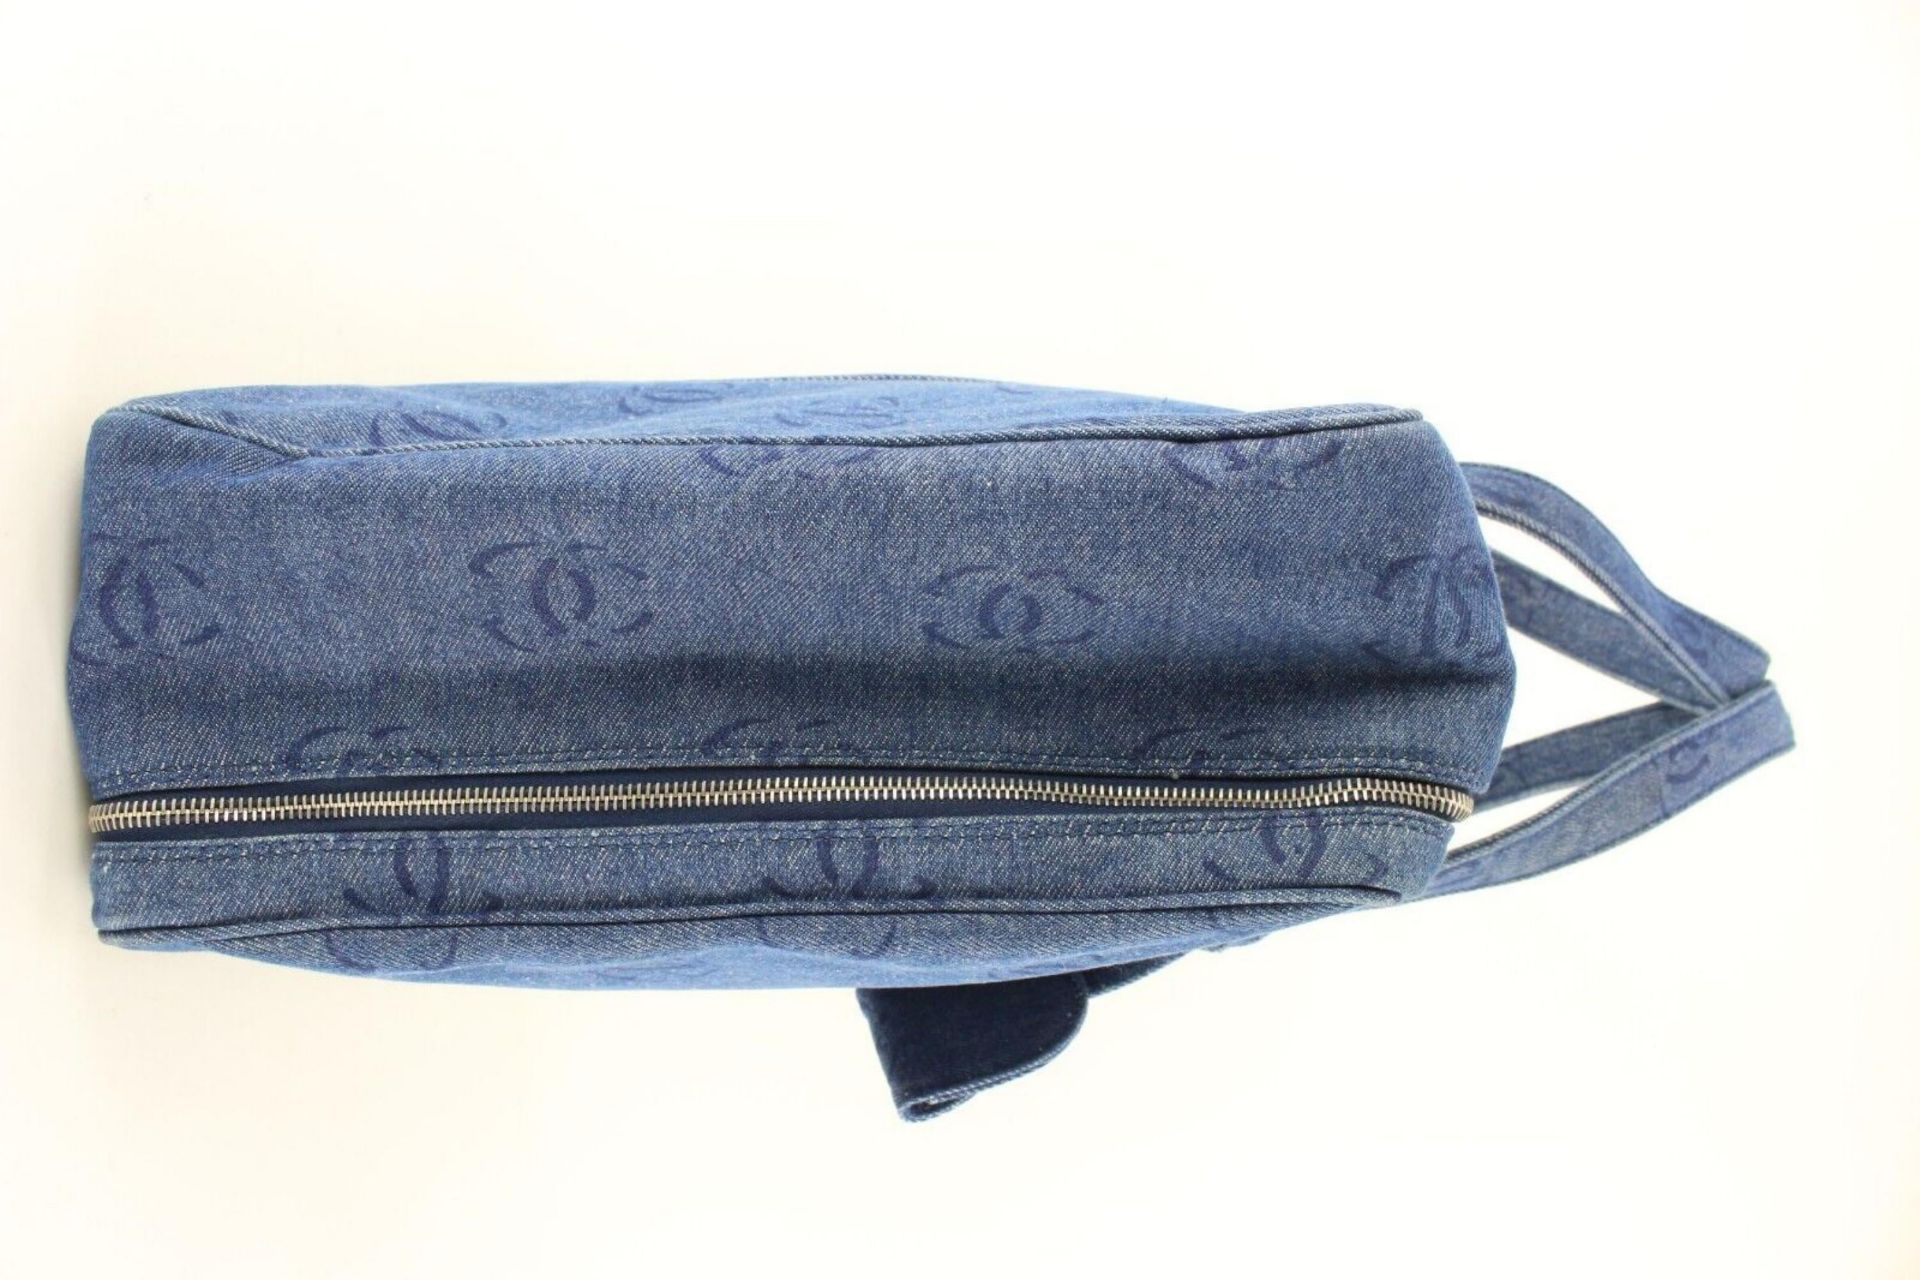 CHANEL JUMBO CC LOGO ALL OVER DENIM BRIEFCASE WORK SUITCASE - Image 6 of 11